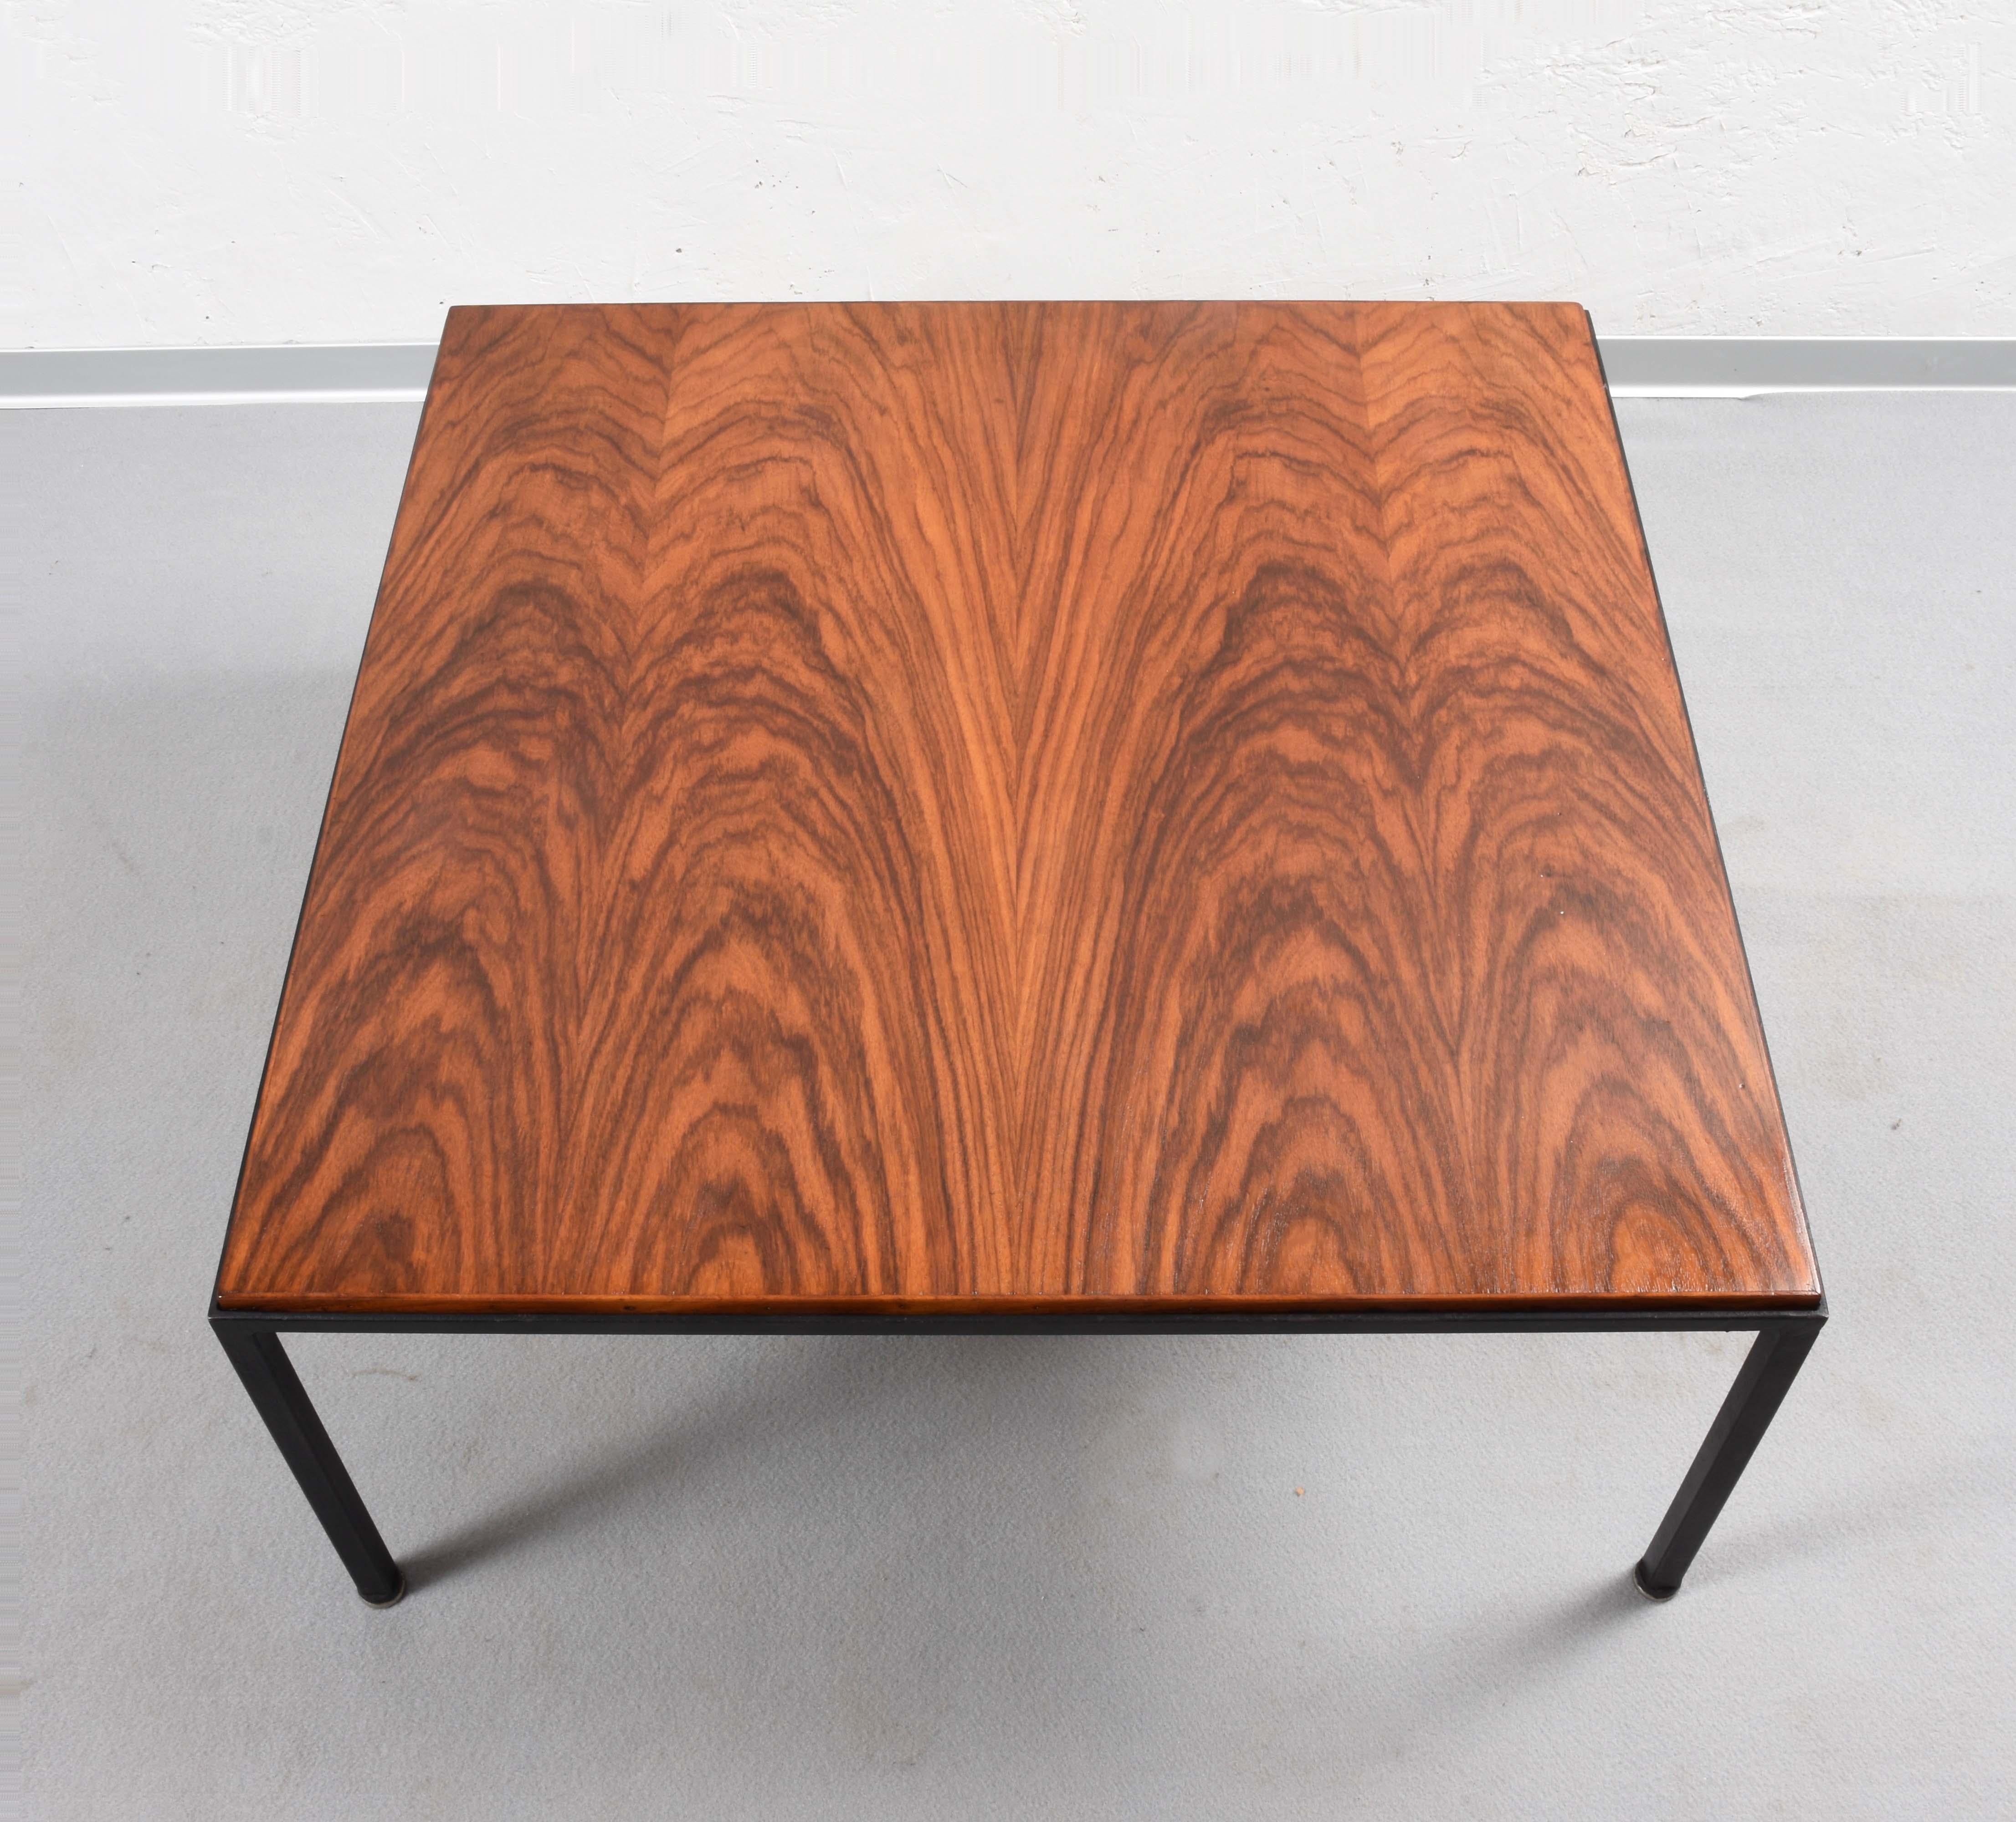 Italian Design Midcentury Wood and Iron Square Coffee Italian Table, 1960s For Sale 1